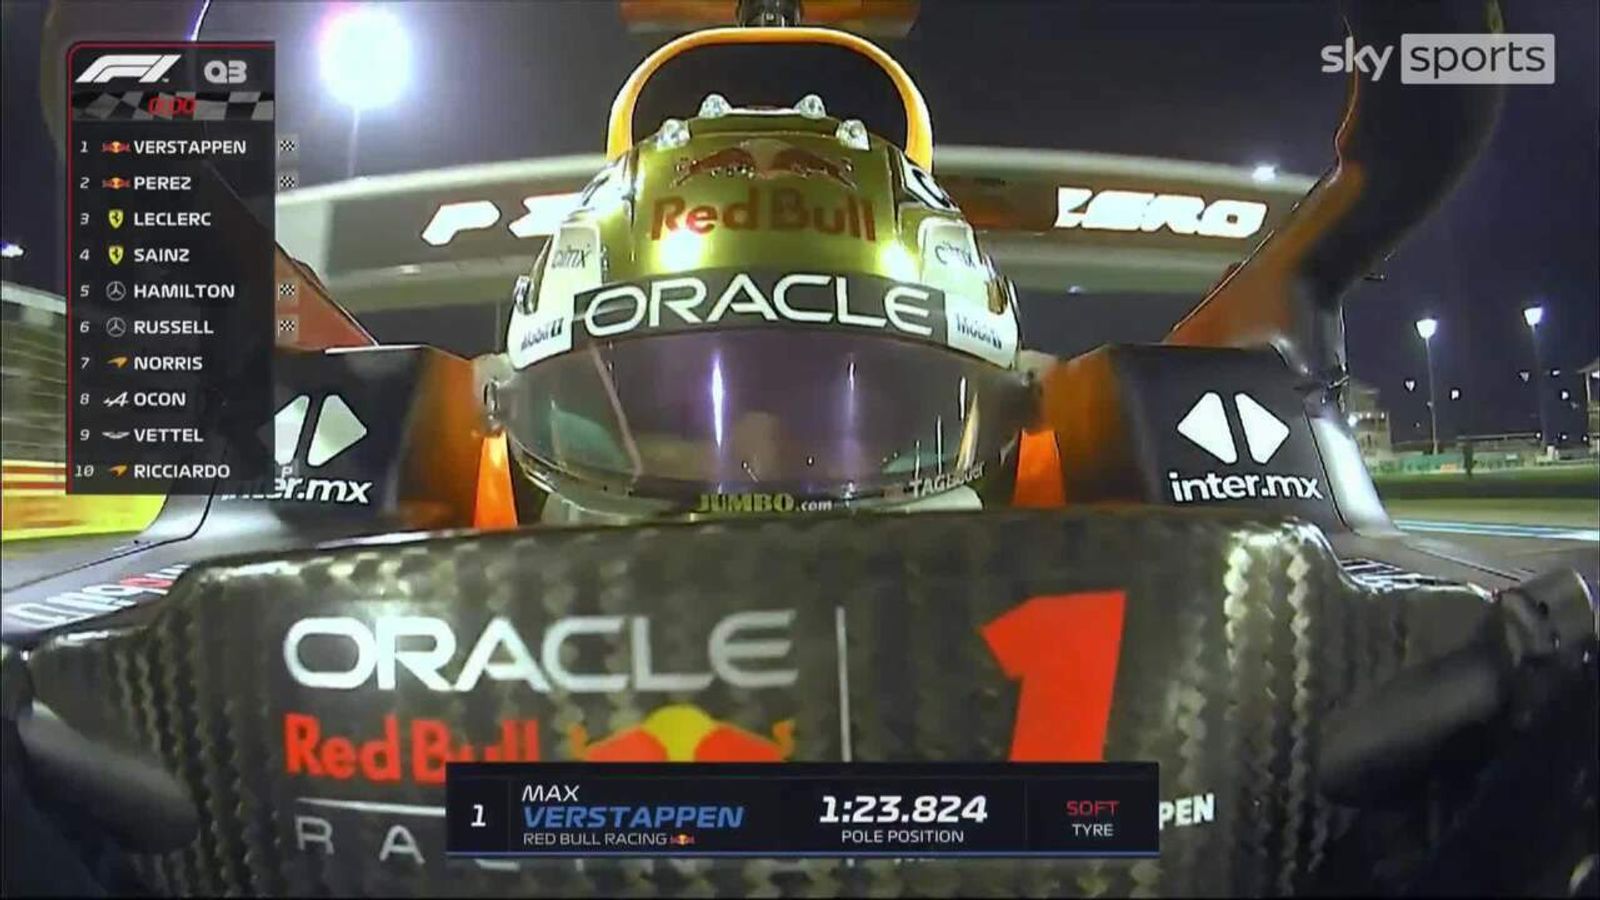 Max Verstappen takes pole in Abu Dhabi with dominating drive | F1 News ...